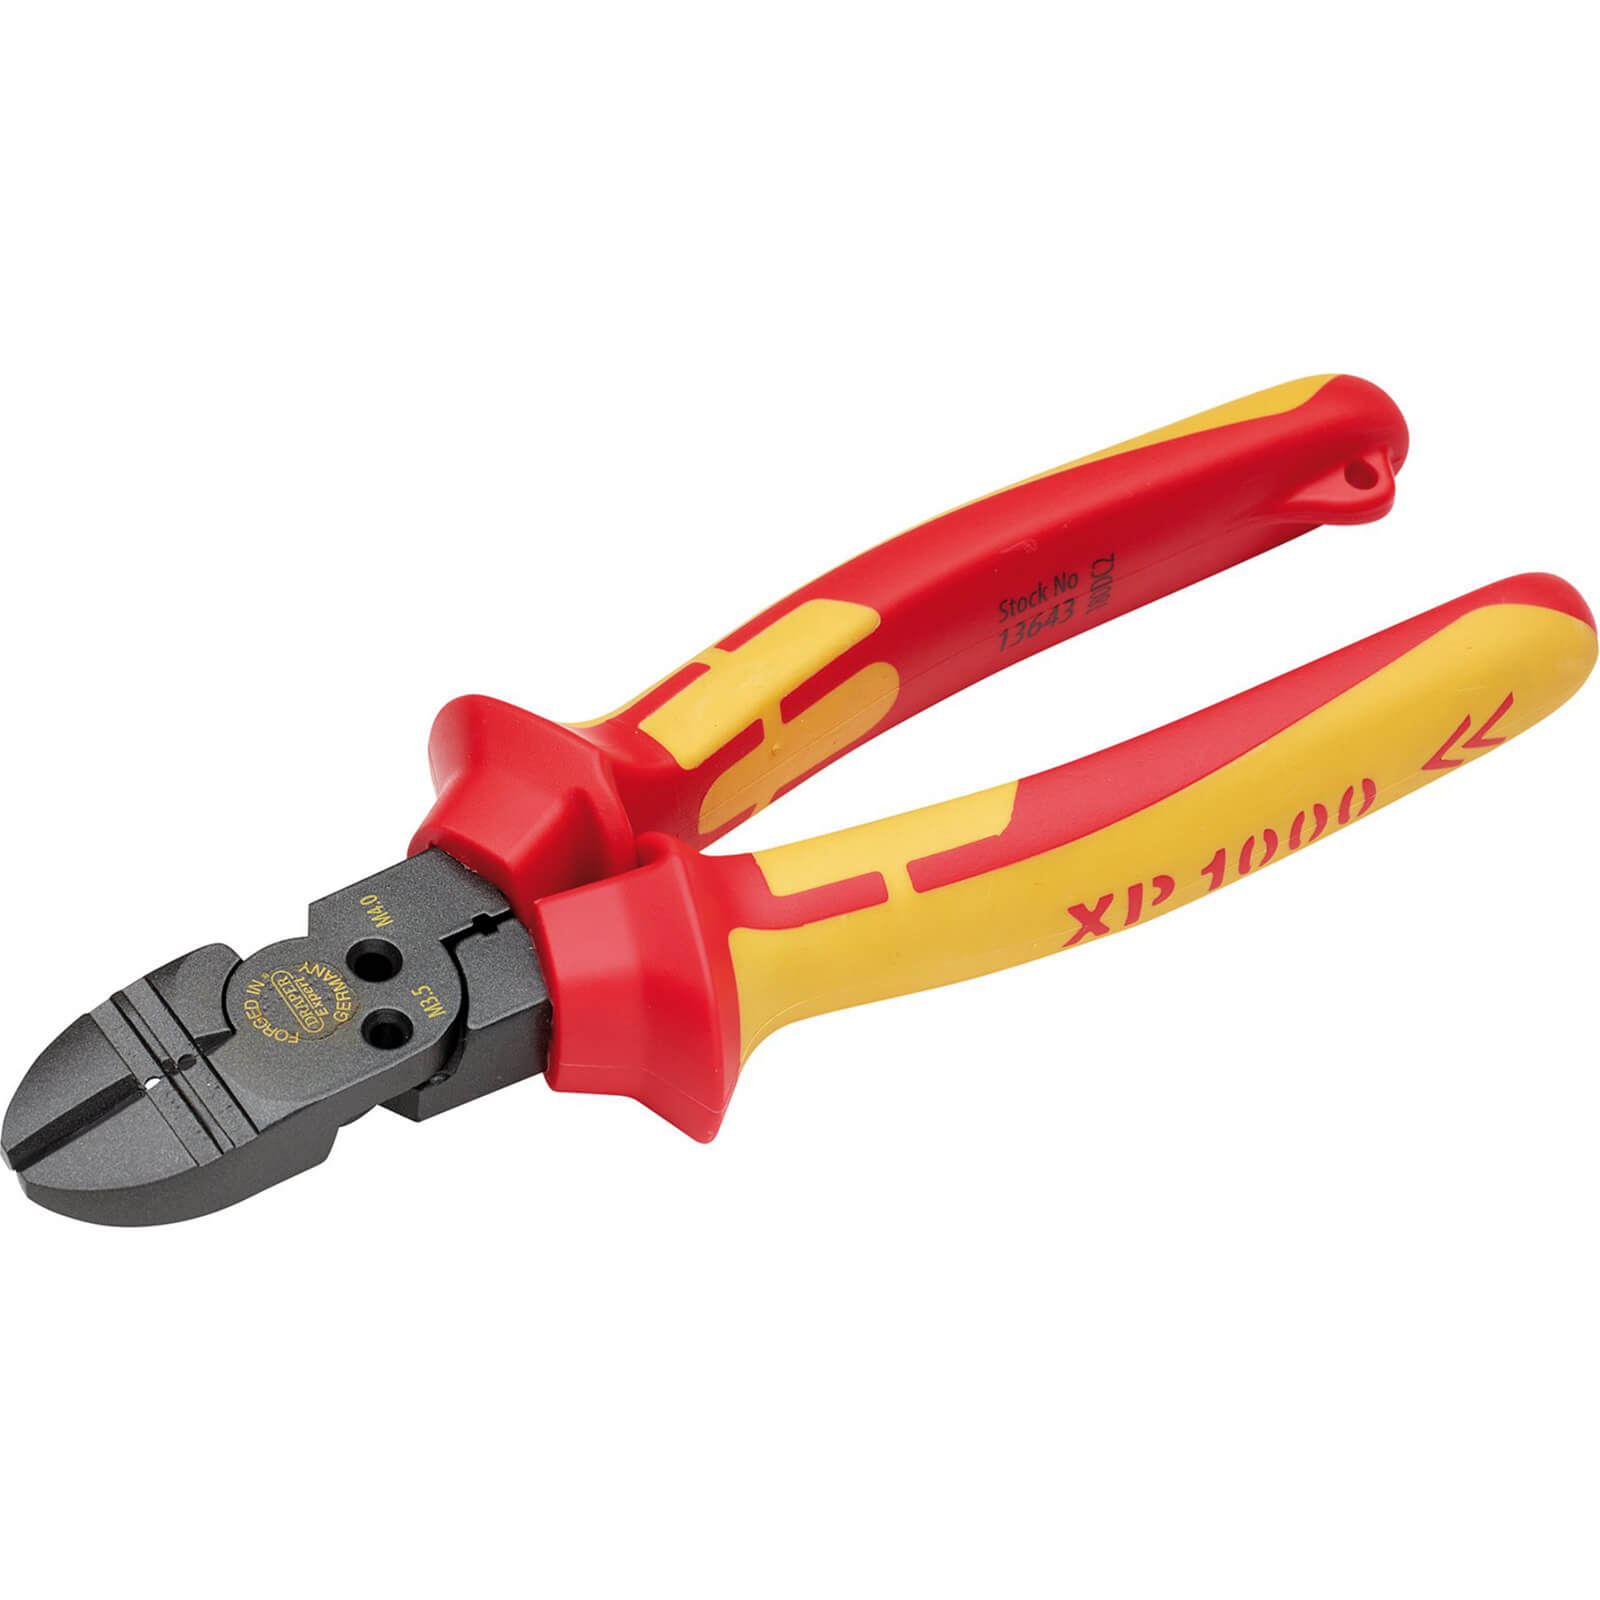 Image of Draper XP1000 VDE Insulated Tethered 4 in 1 Combination Cutter 180mm